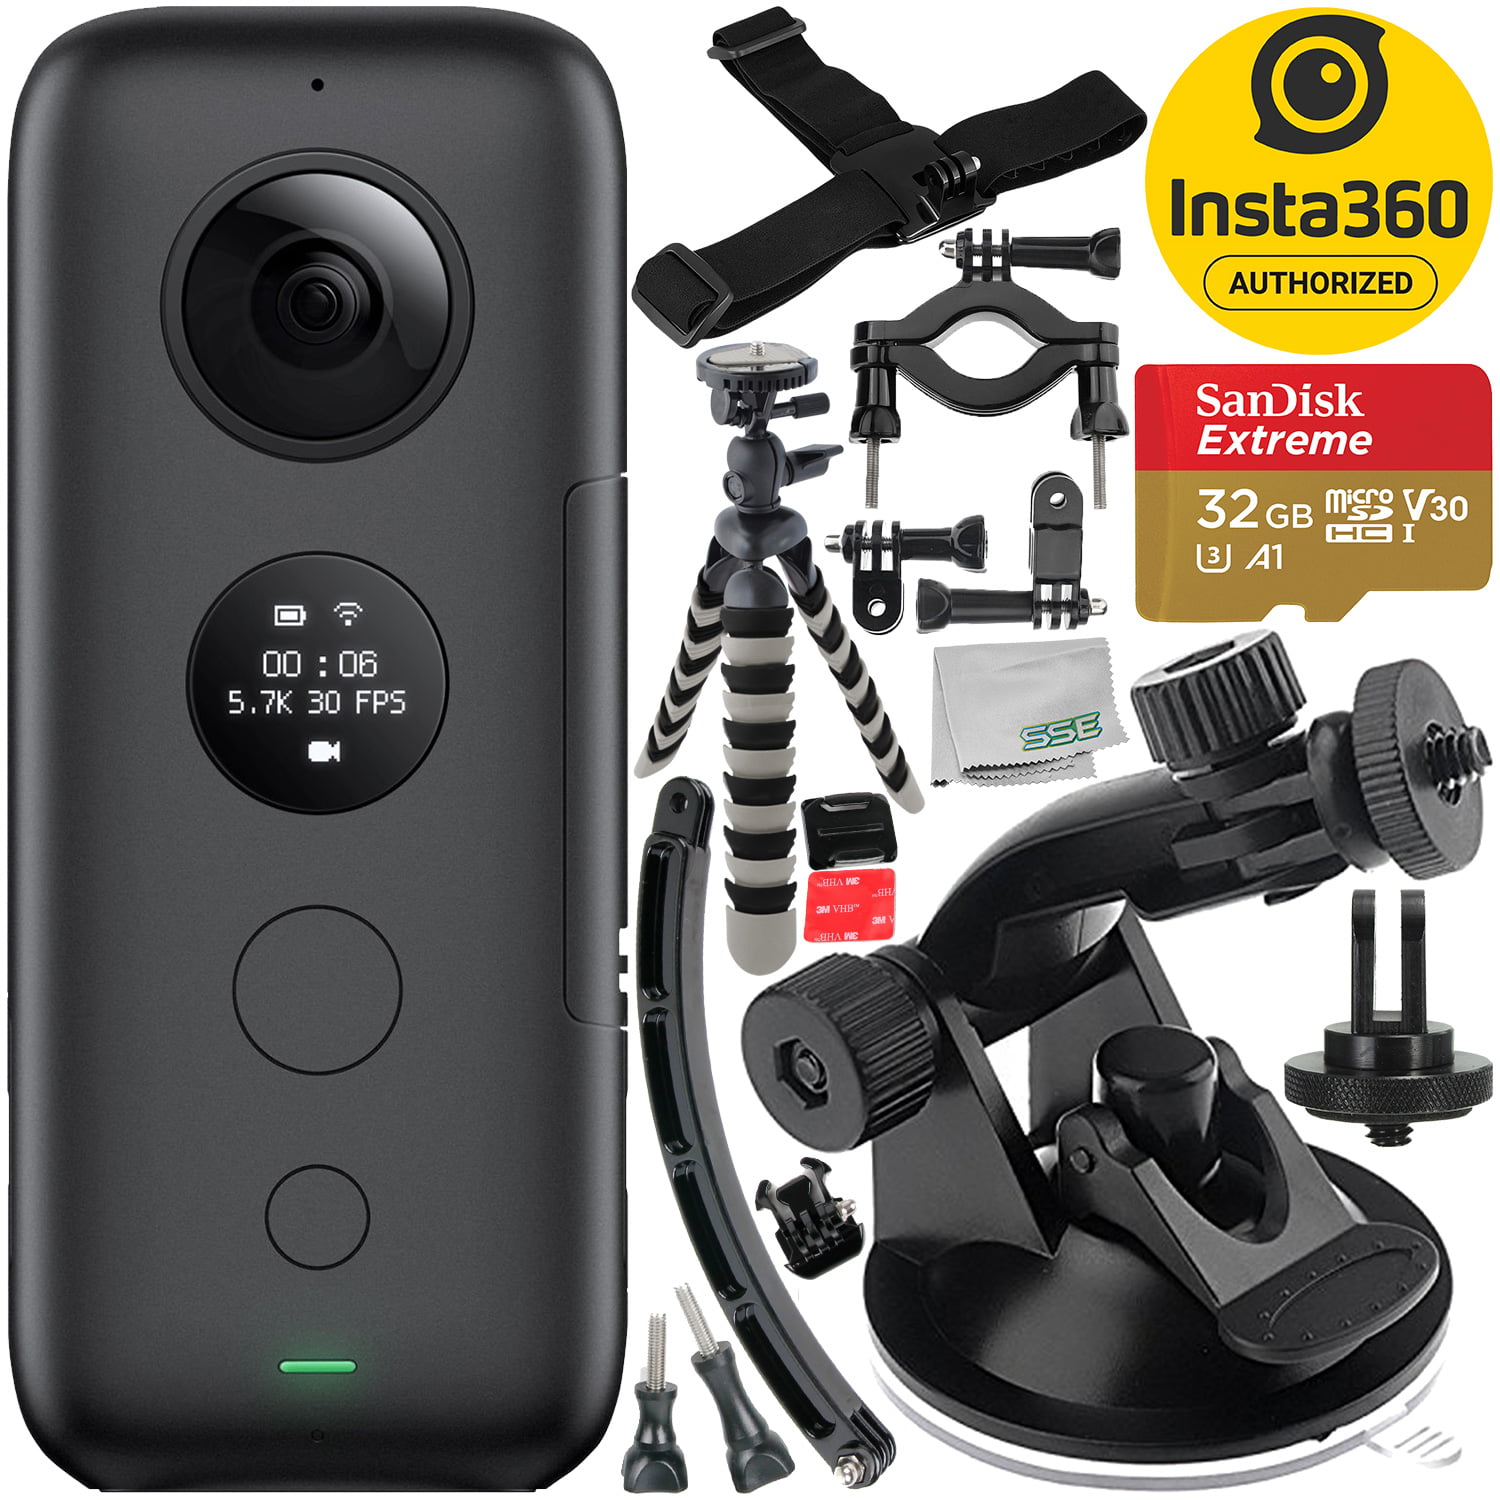 11 Insta360 Camera Insta360 attachable launched specifications